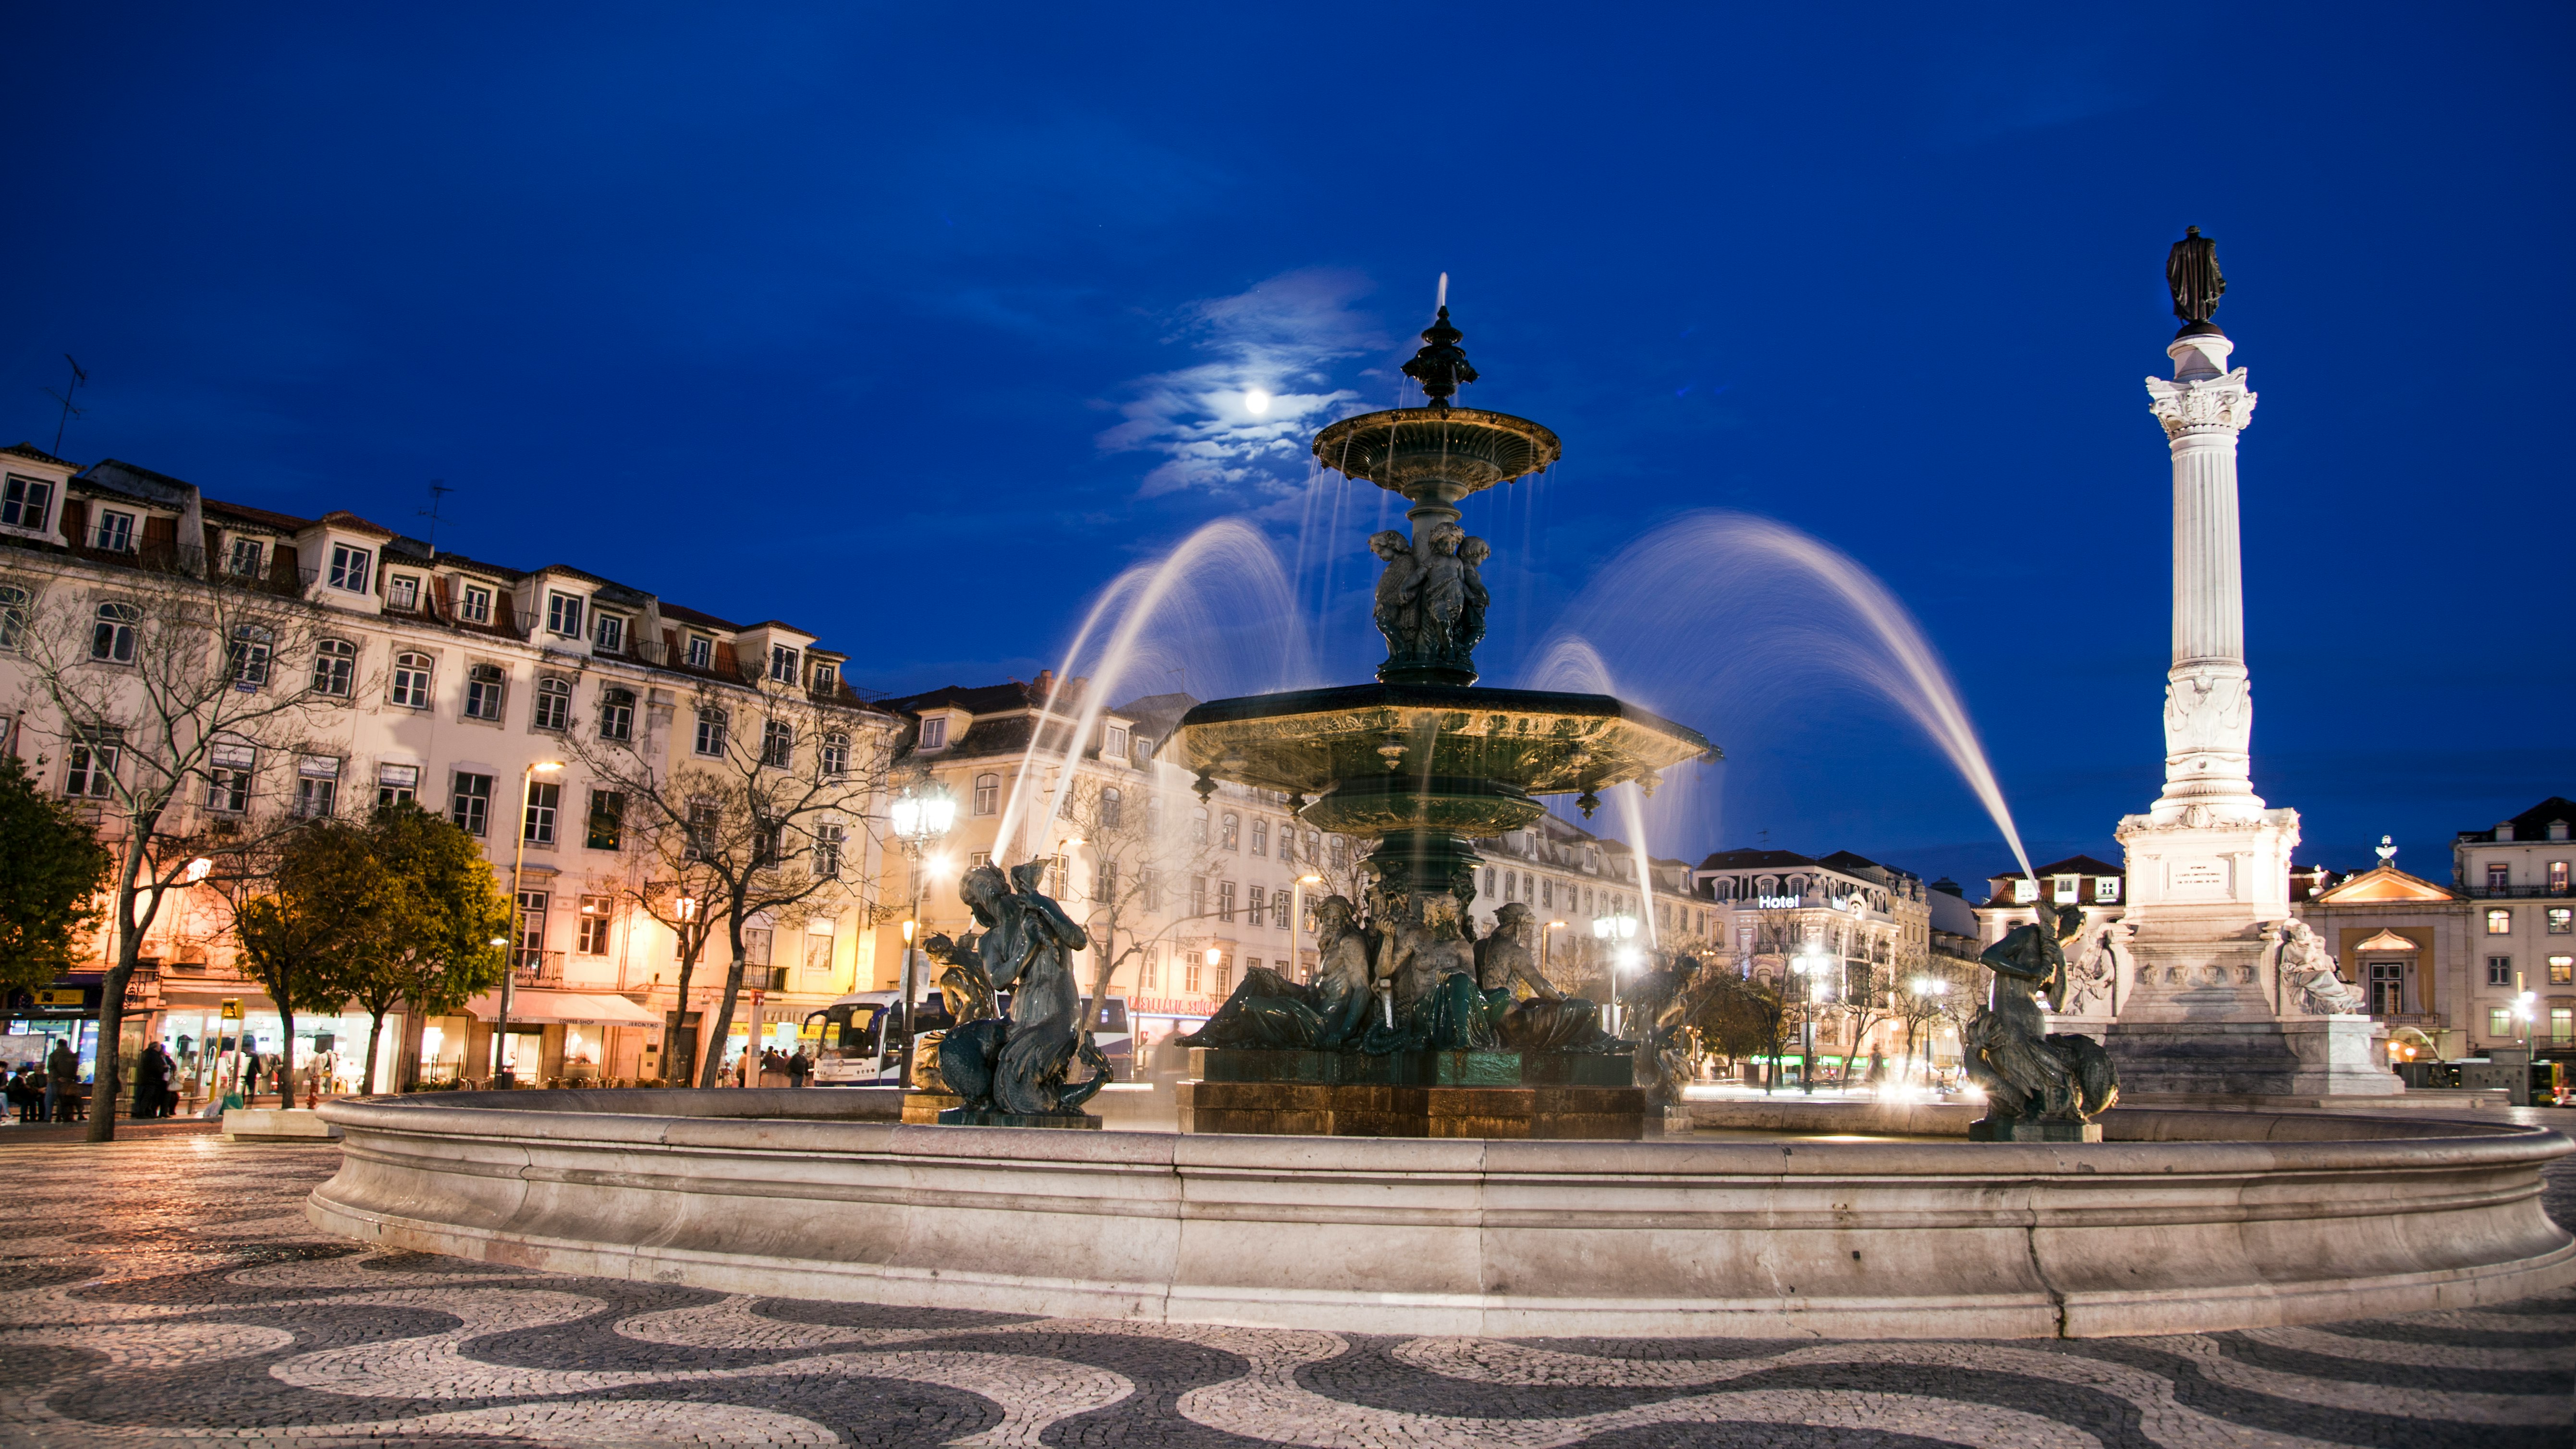 water fountain in the middle of the city during night time